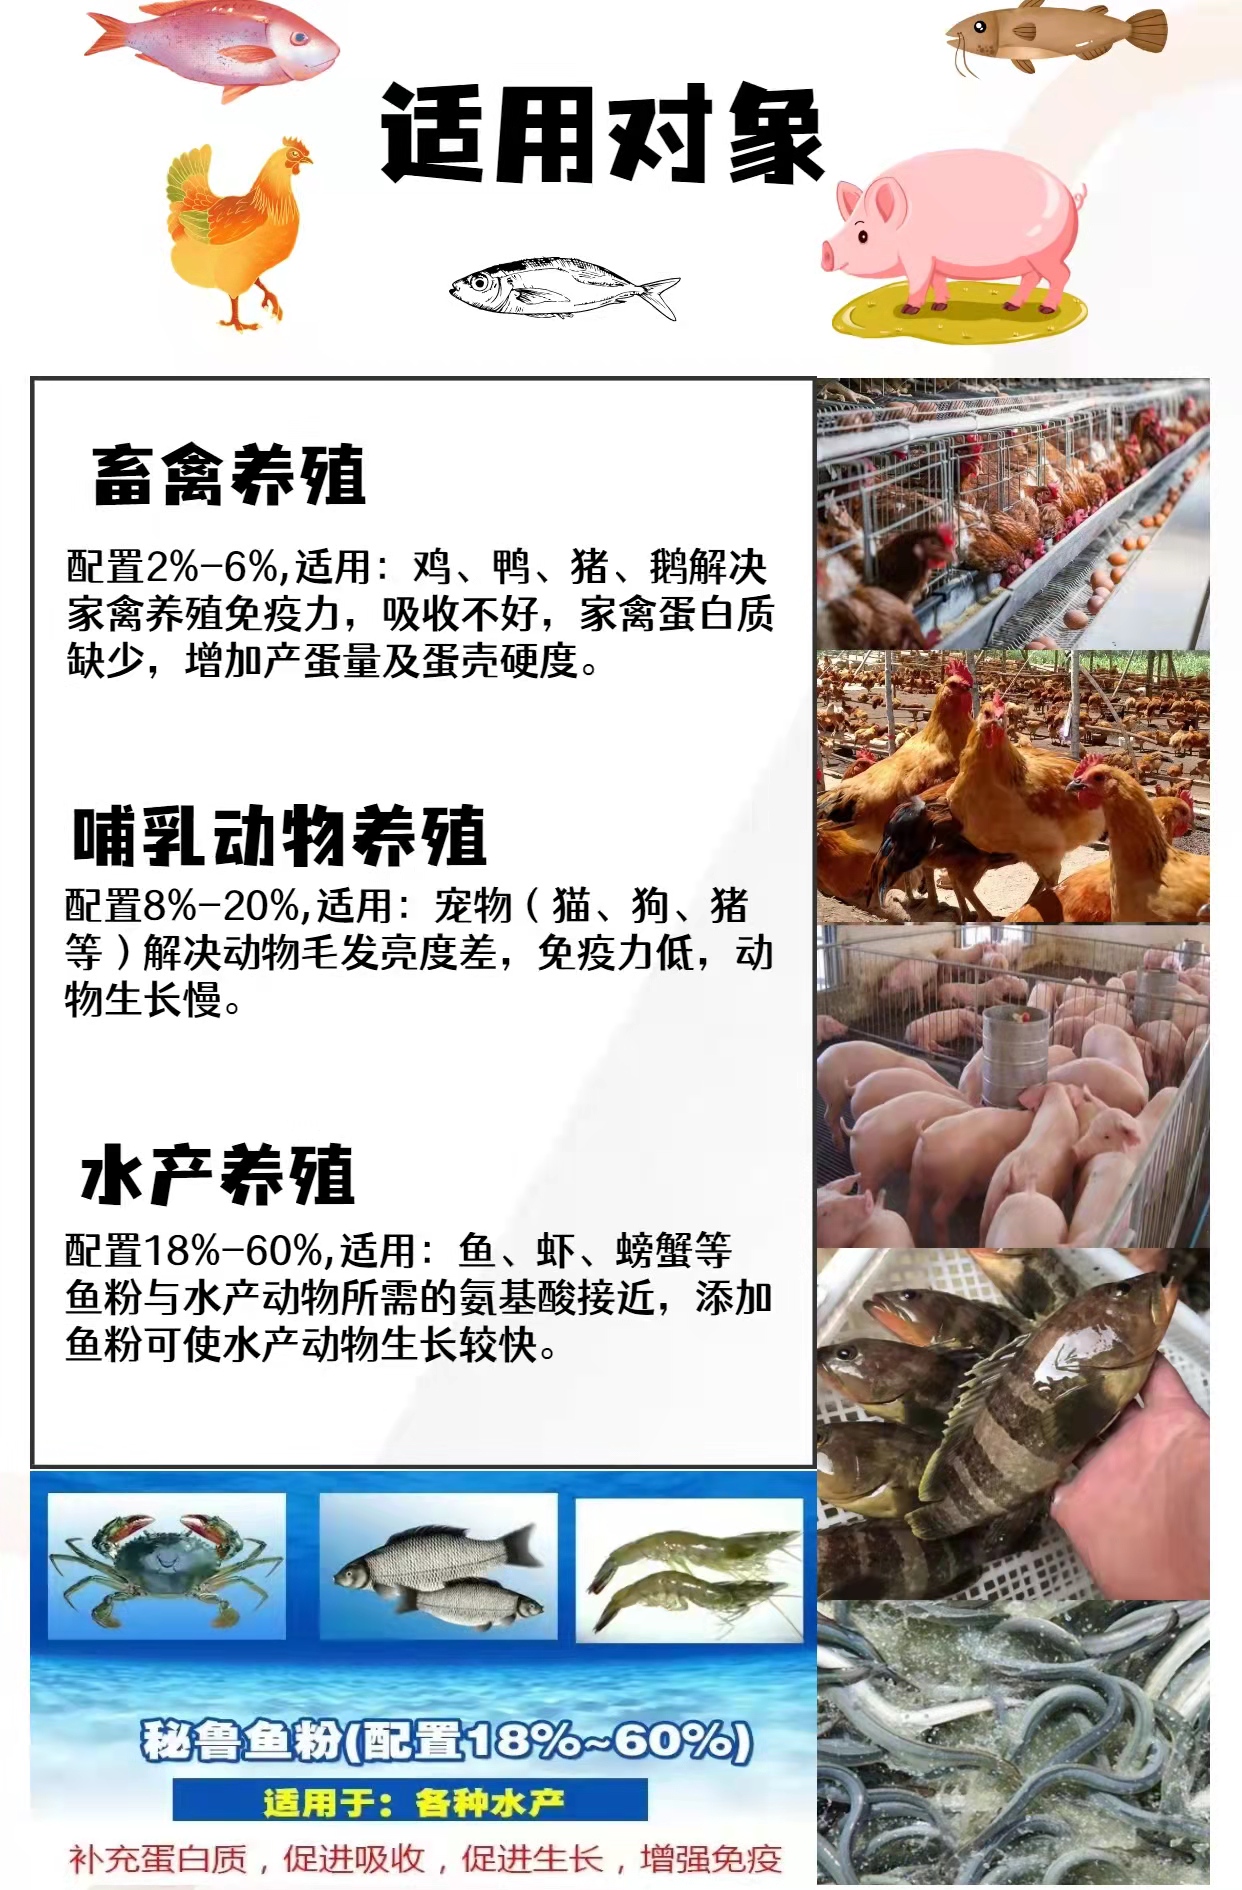 Japanese grade imported Peruvian fish meal protein with a content greater than 67% is very helpful for the growth of young animals